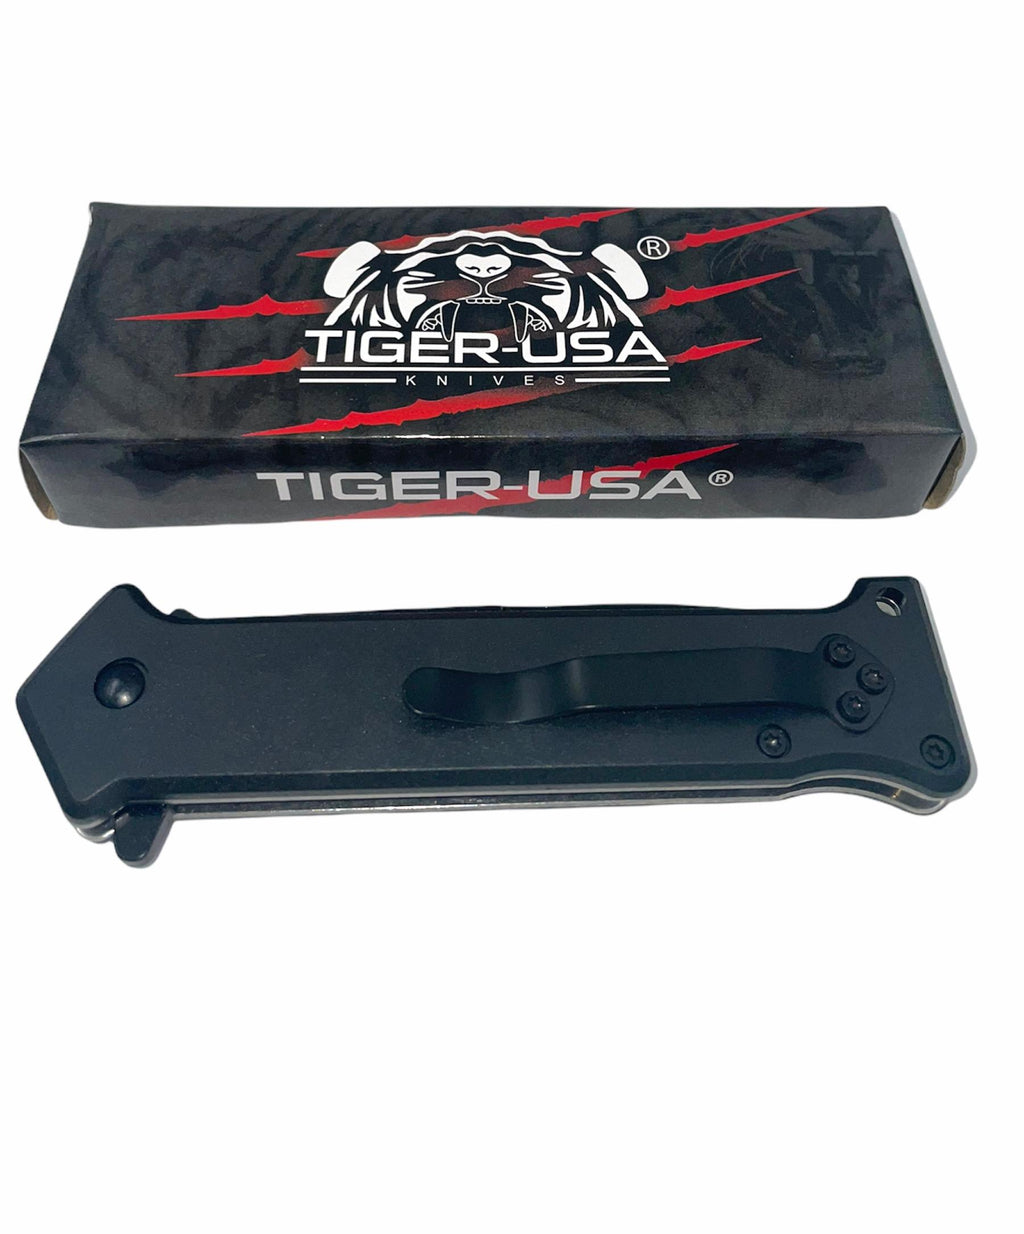 Tiger-USA Spring Assisted Knife FISH